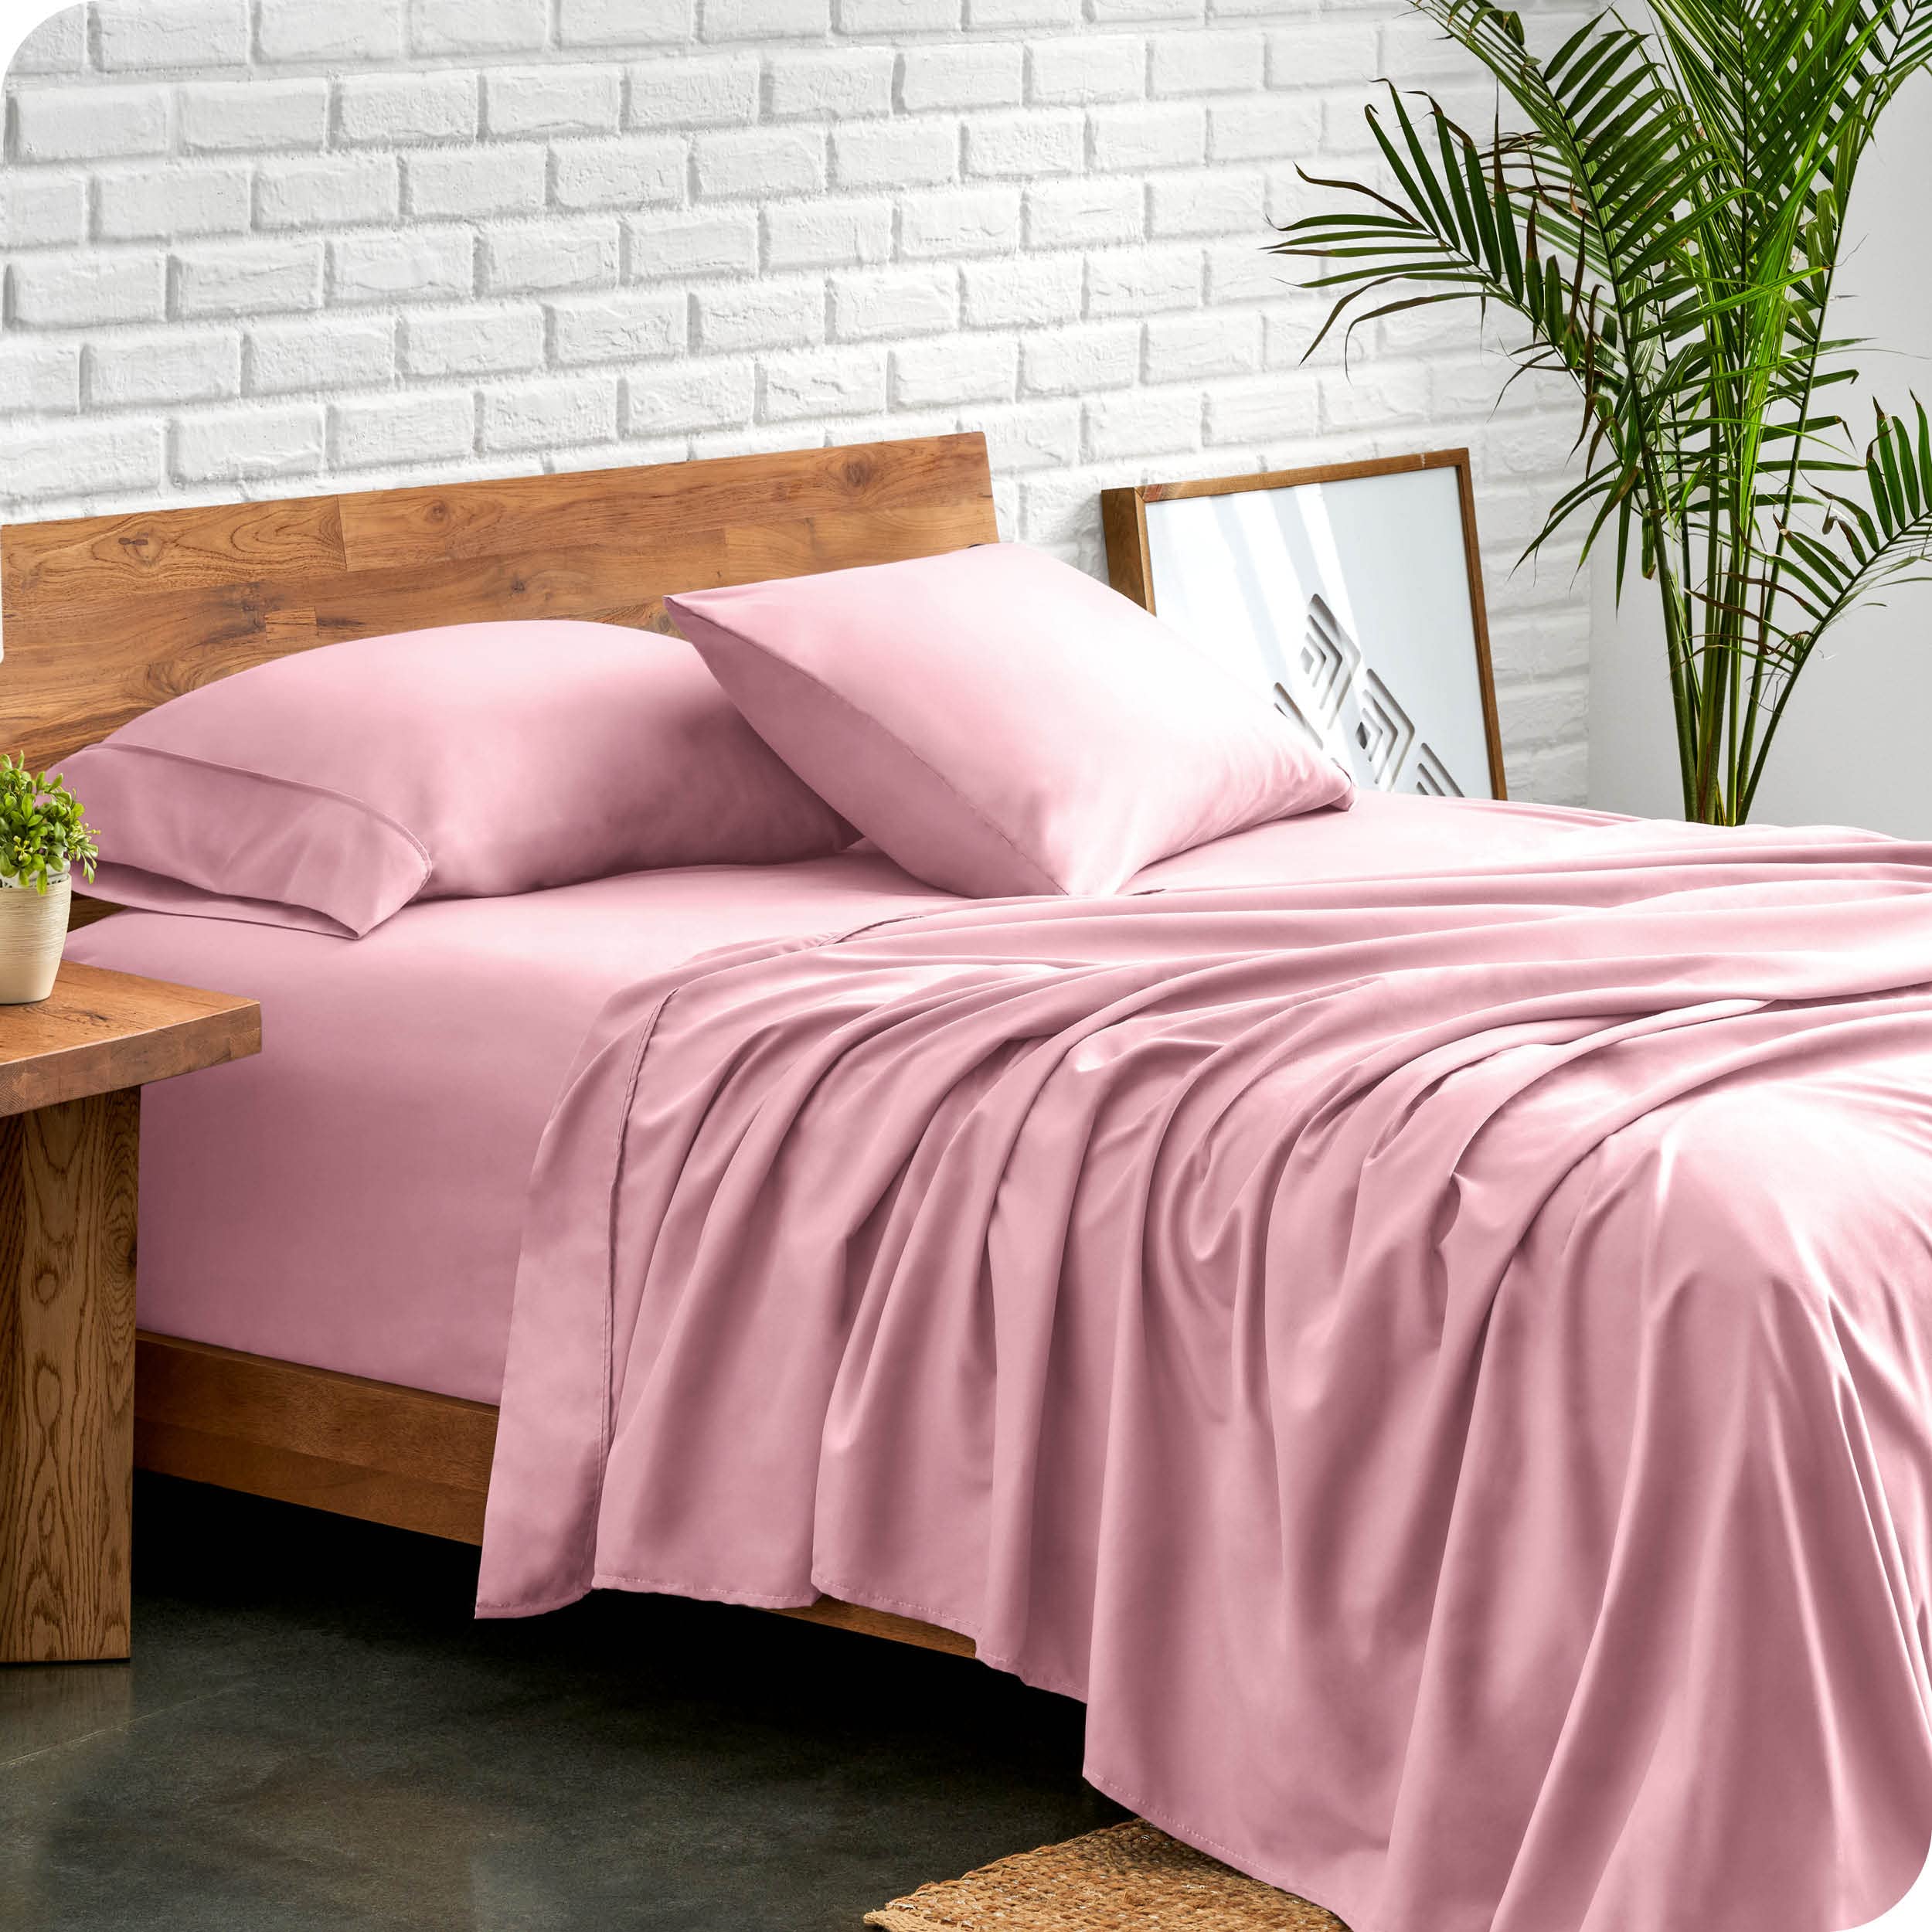 Book Cover Bare Home Twin XL Sheet Set - College Dorm Size - Luxury 1800 Ultra-Soft Microfiber Twin Extra Long Bed Sheets - Deep Pockets - Easy Fit - Extra Soft - 3 Piece Set - Bed Sheets (Twin XL, Light Pink) Twin XL 26 - Light Pink